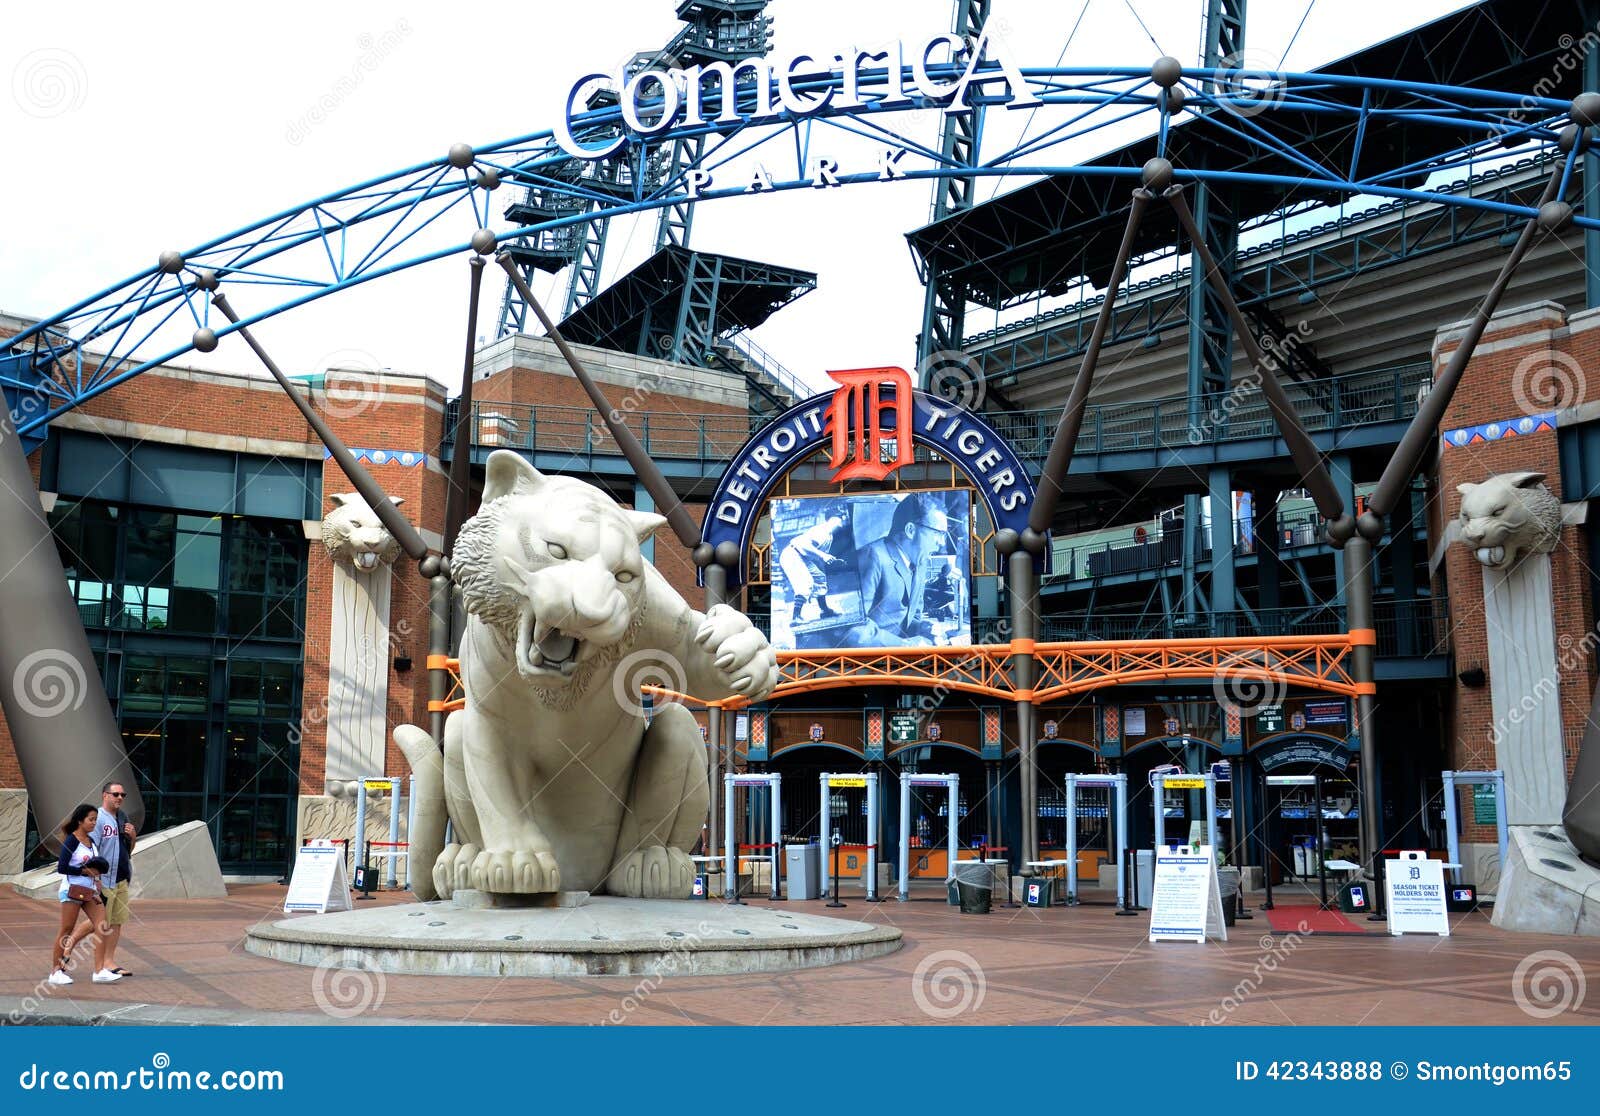 Comerica Park Front Entrance Editorial Stock Photo - Image of majors,  stadium: 42343888